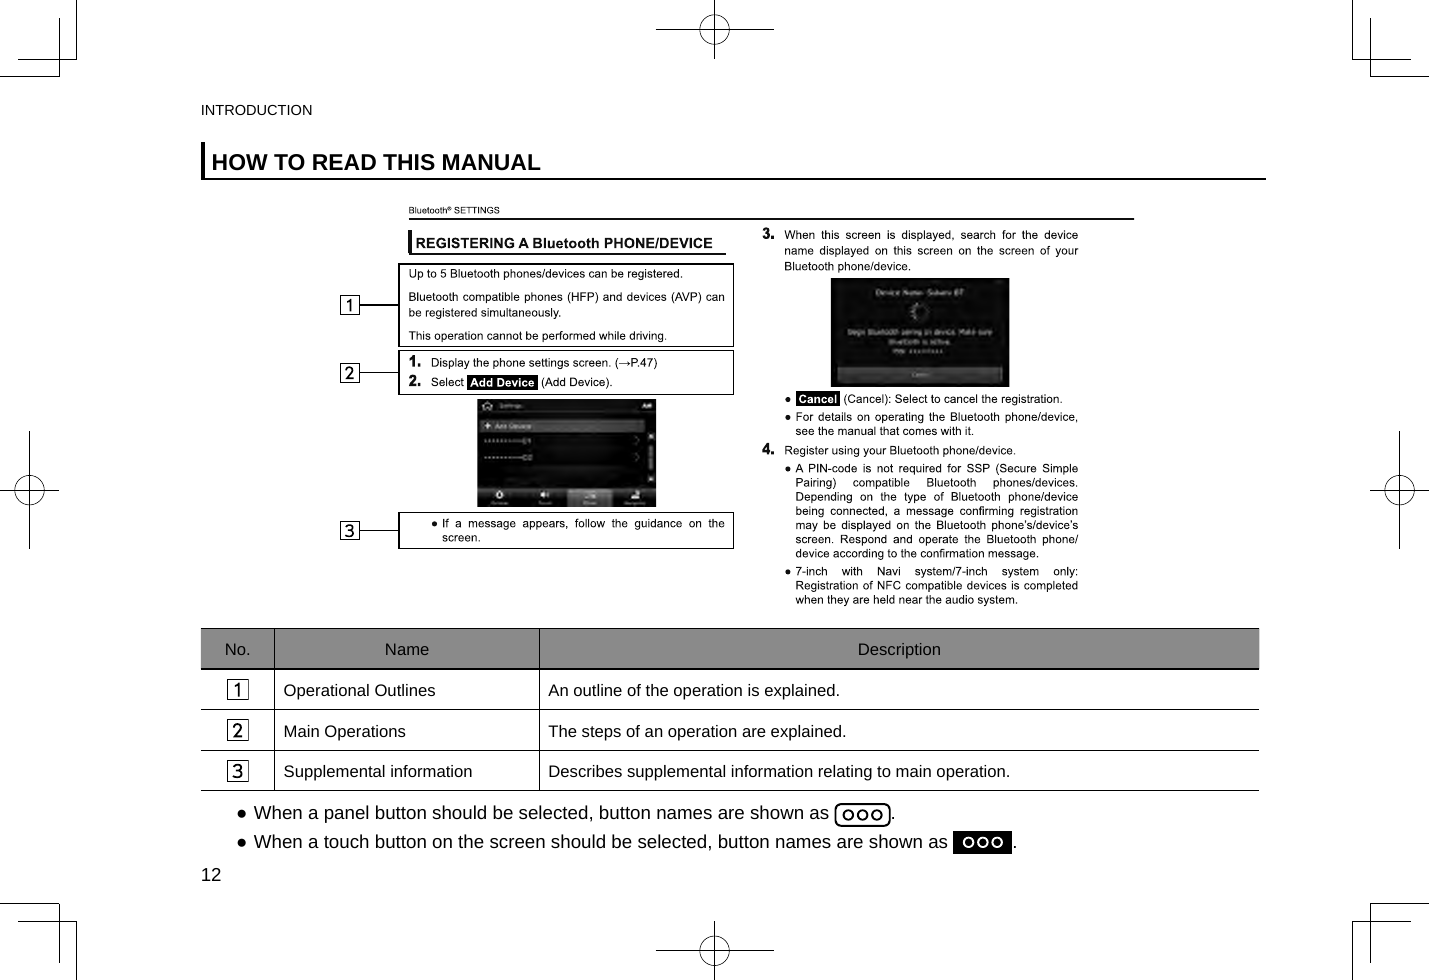 HOW TO READ THIS MANUALNo. Name DescriptionOperational Outlines An outline of the operation is explained.Main Operations The steps of an operation are explained.Supplemental information Describes supplemental information relating to main operation. ●When a panel button should be selected, button names are shown as  . ●When a touch button on the screen should be selected, button names are shown as  .INTRODUCTION12